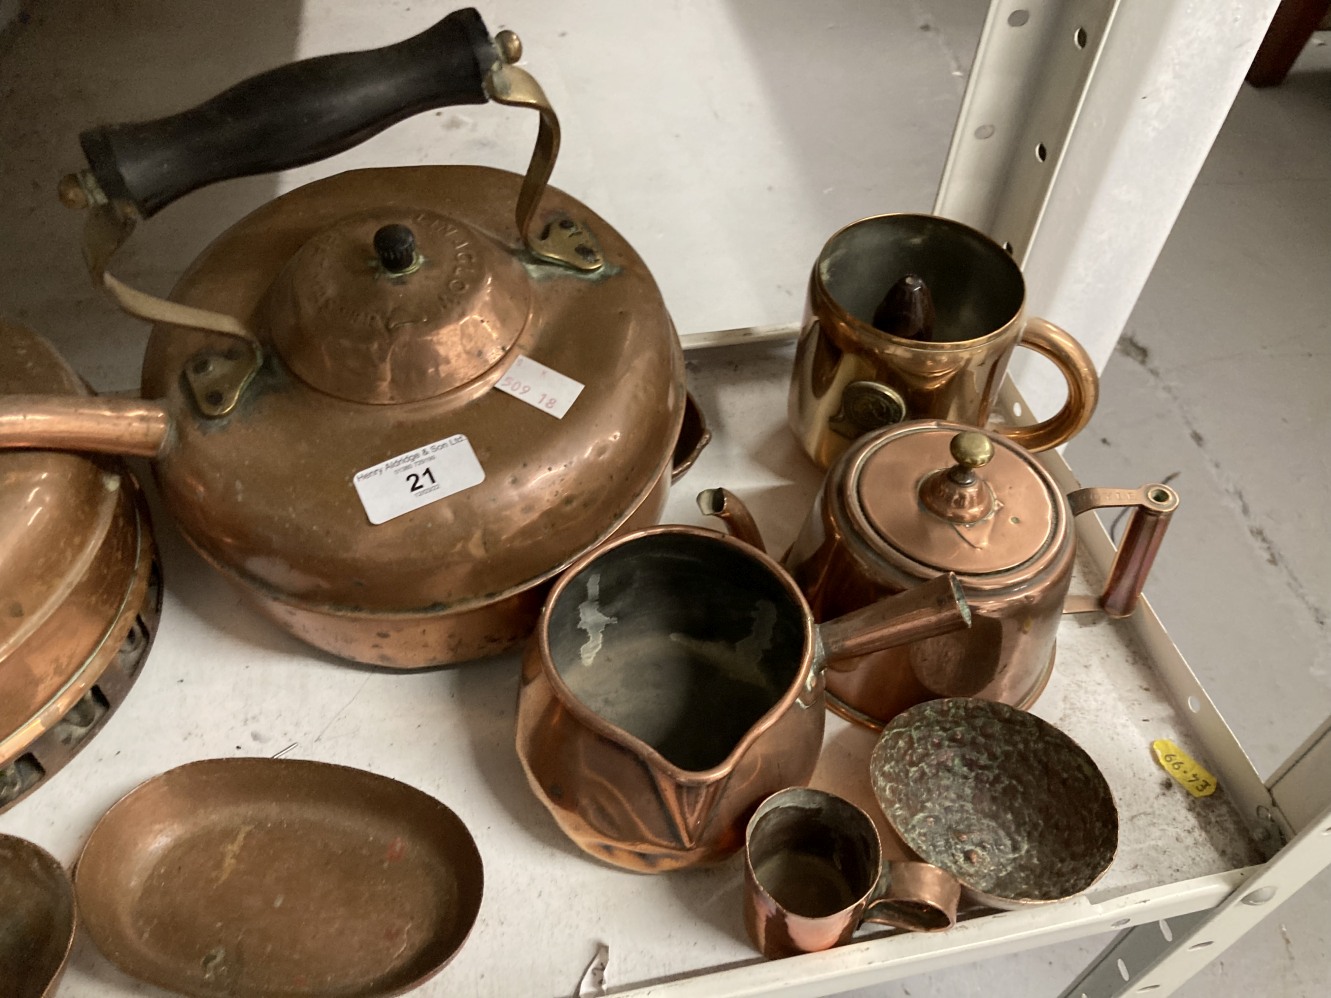 19th/20th cent. Metalware: Copper kettles x 2, chocolate and other pots, decorative mugs x 2, dishes - Image 3 of 3